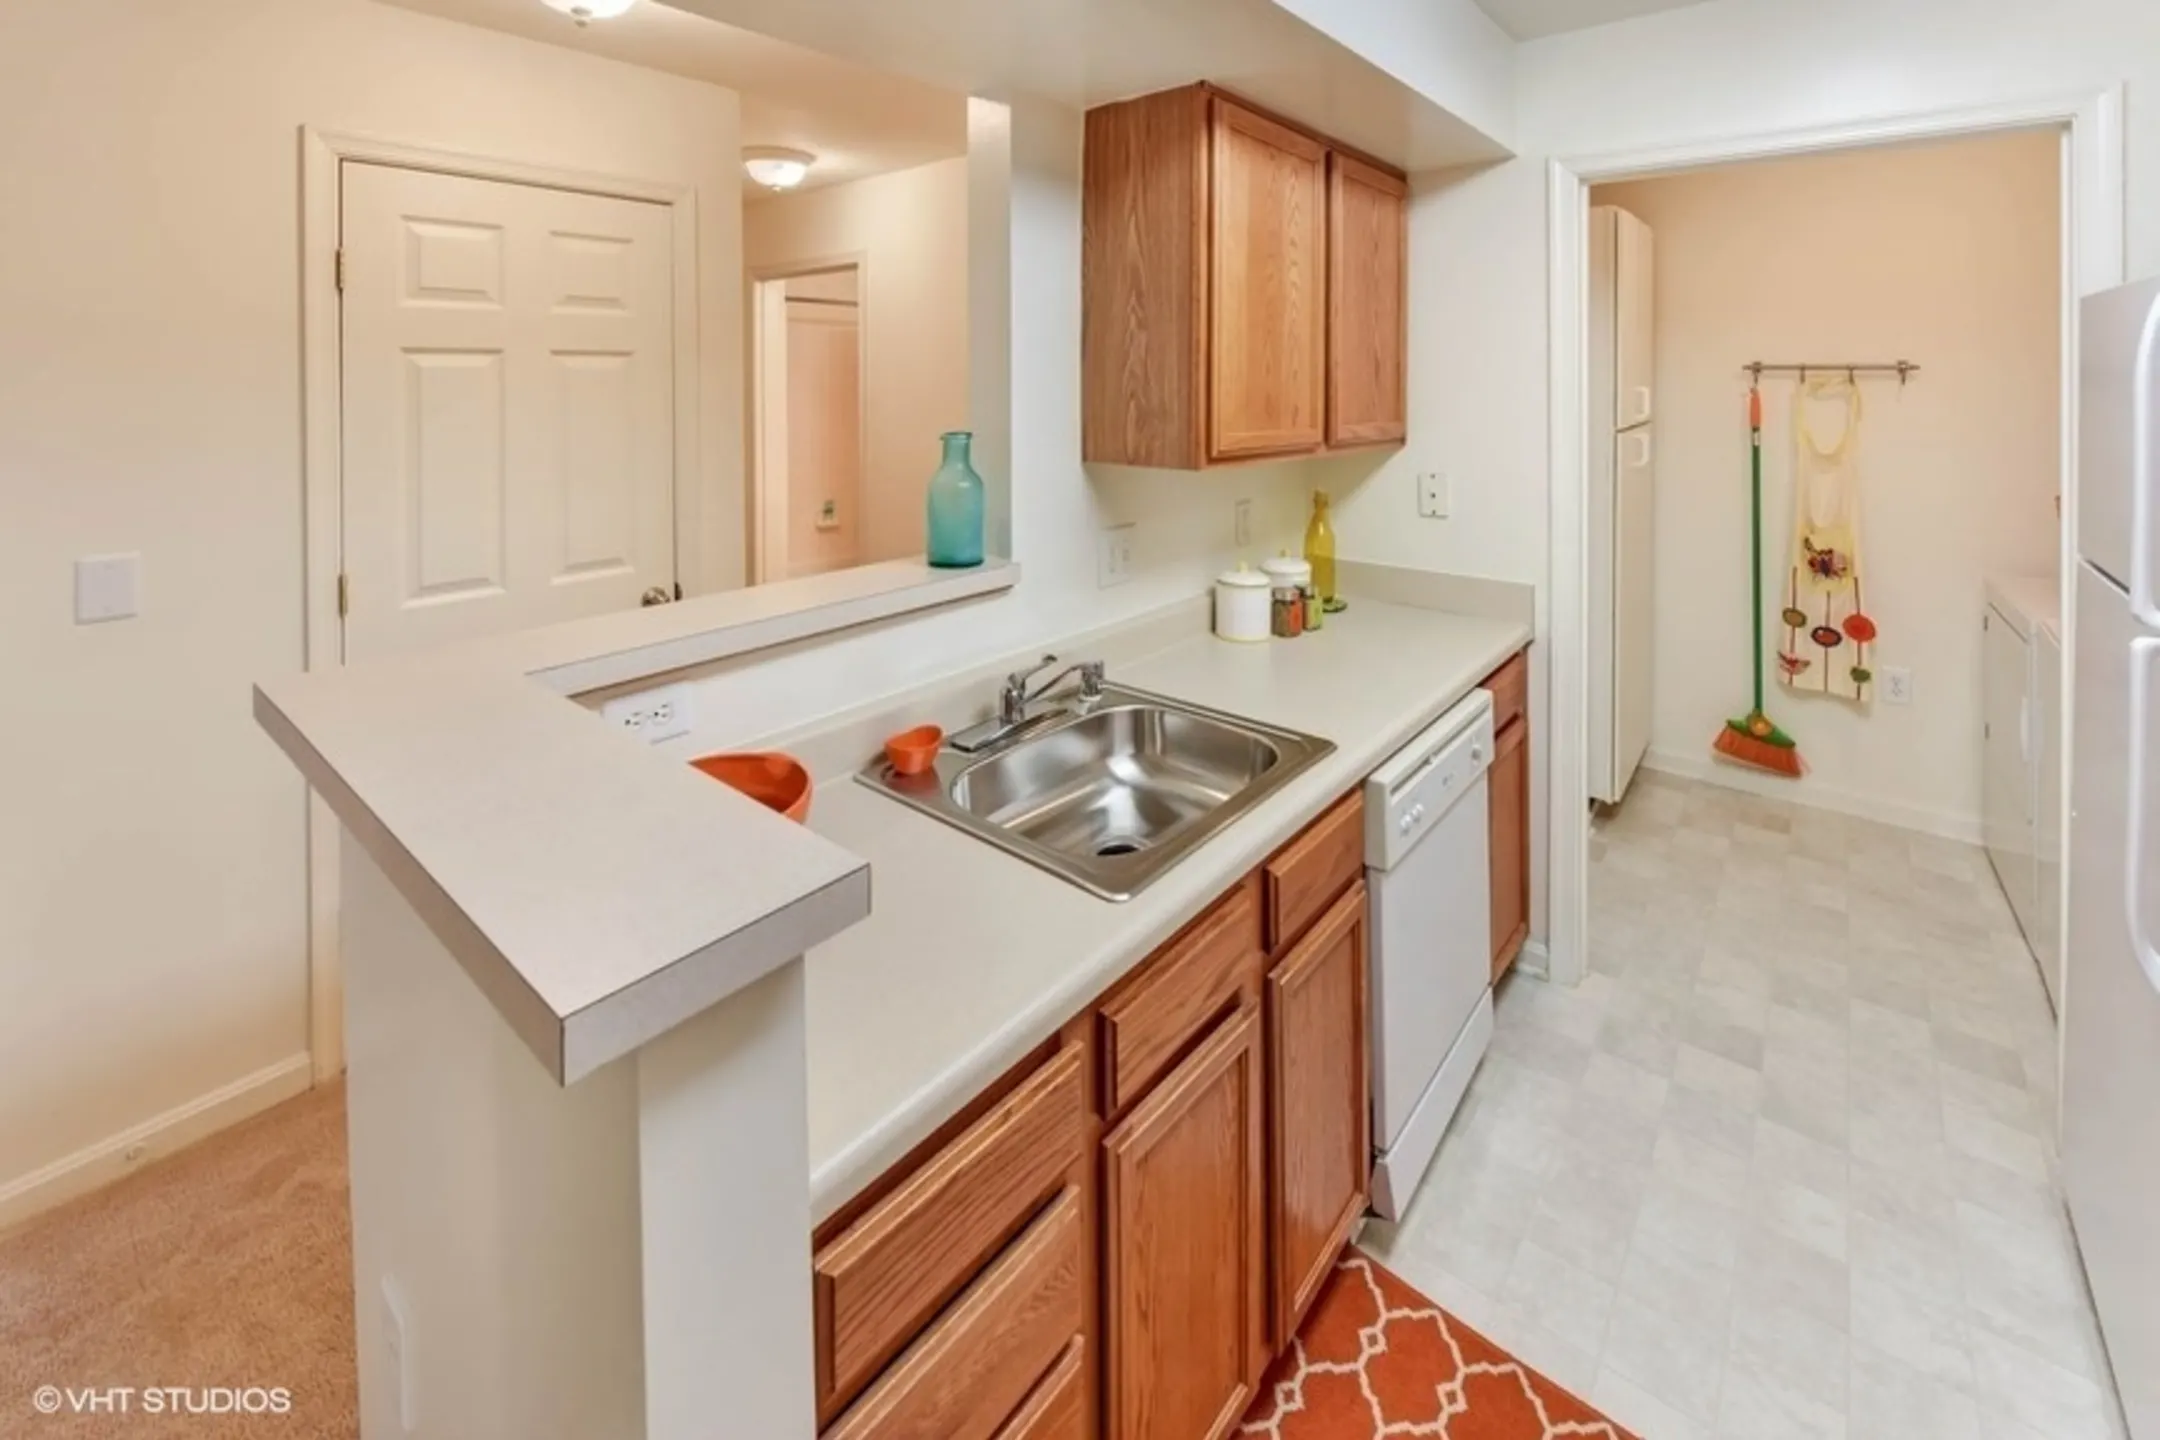 Kitchen - Residences At The Manor - Frederick, MD